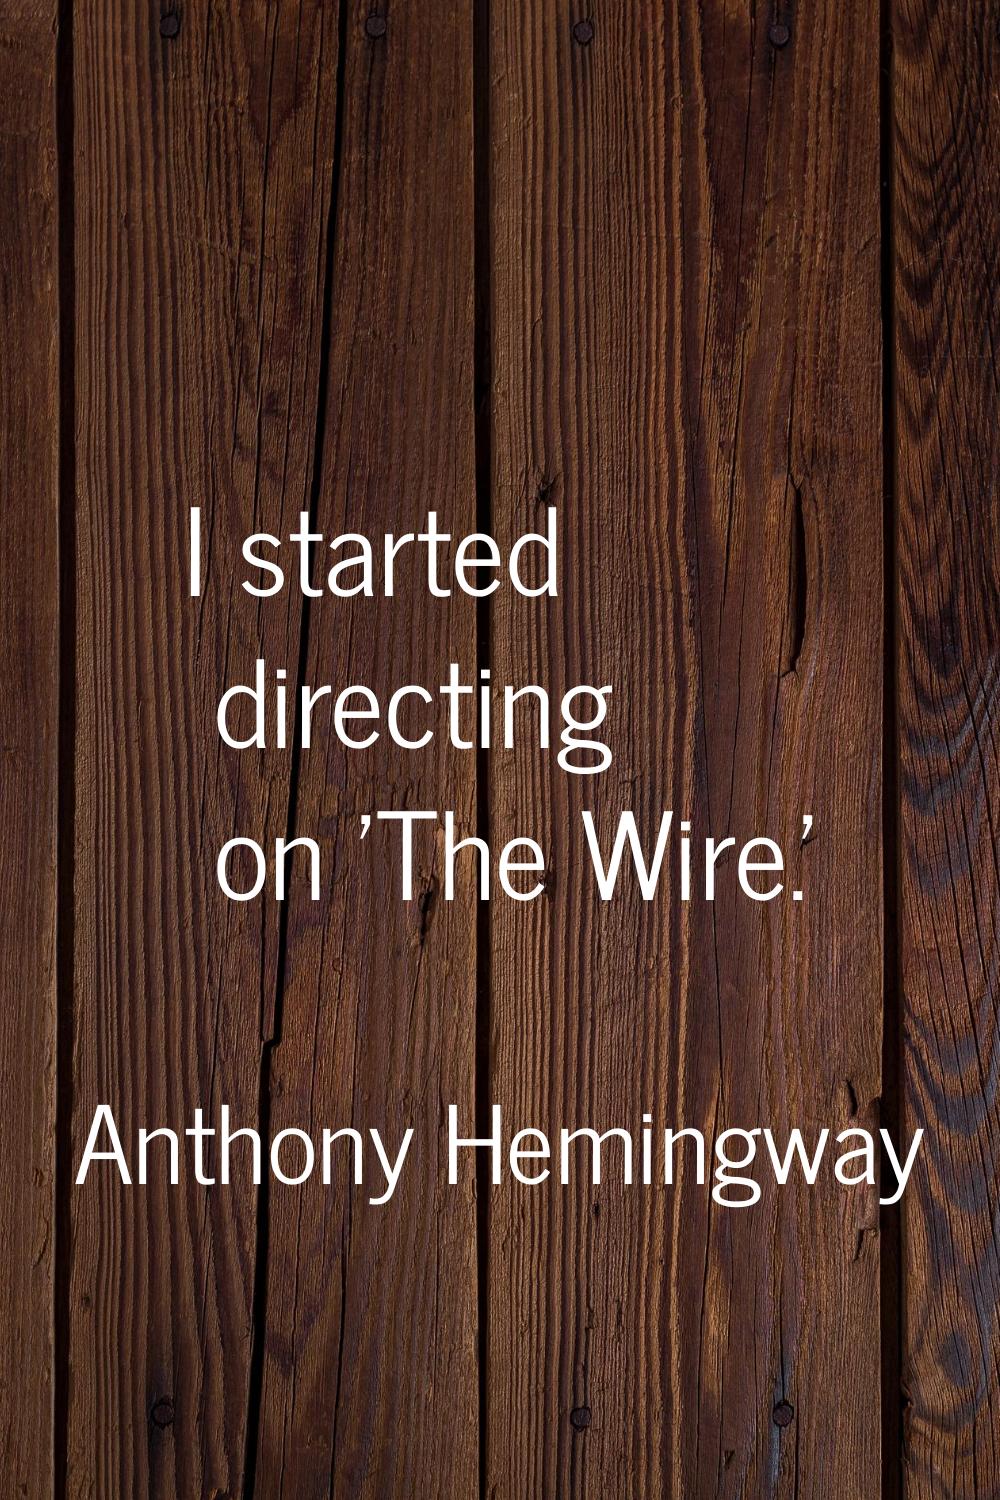 I started directing on 'The Wire.'